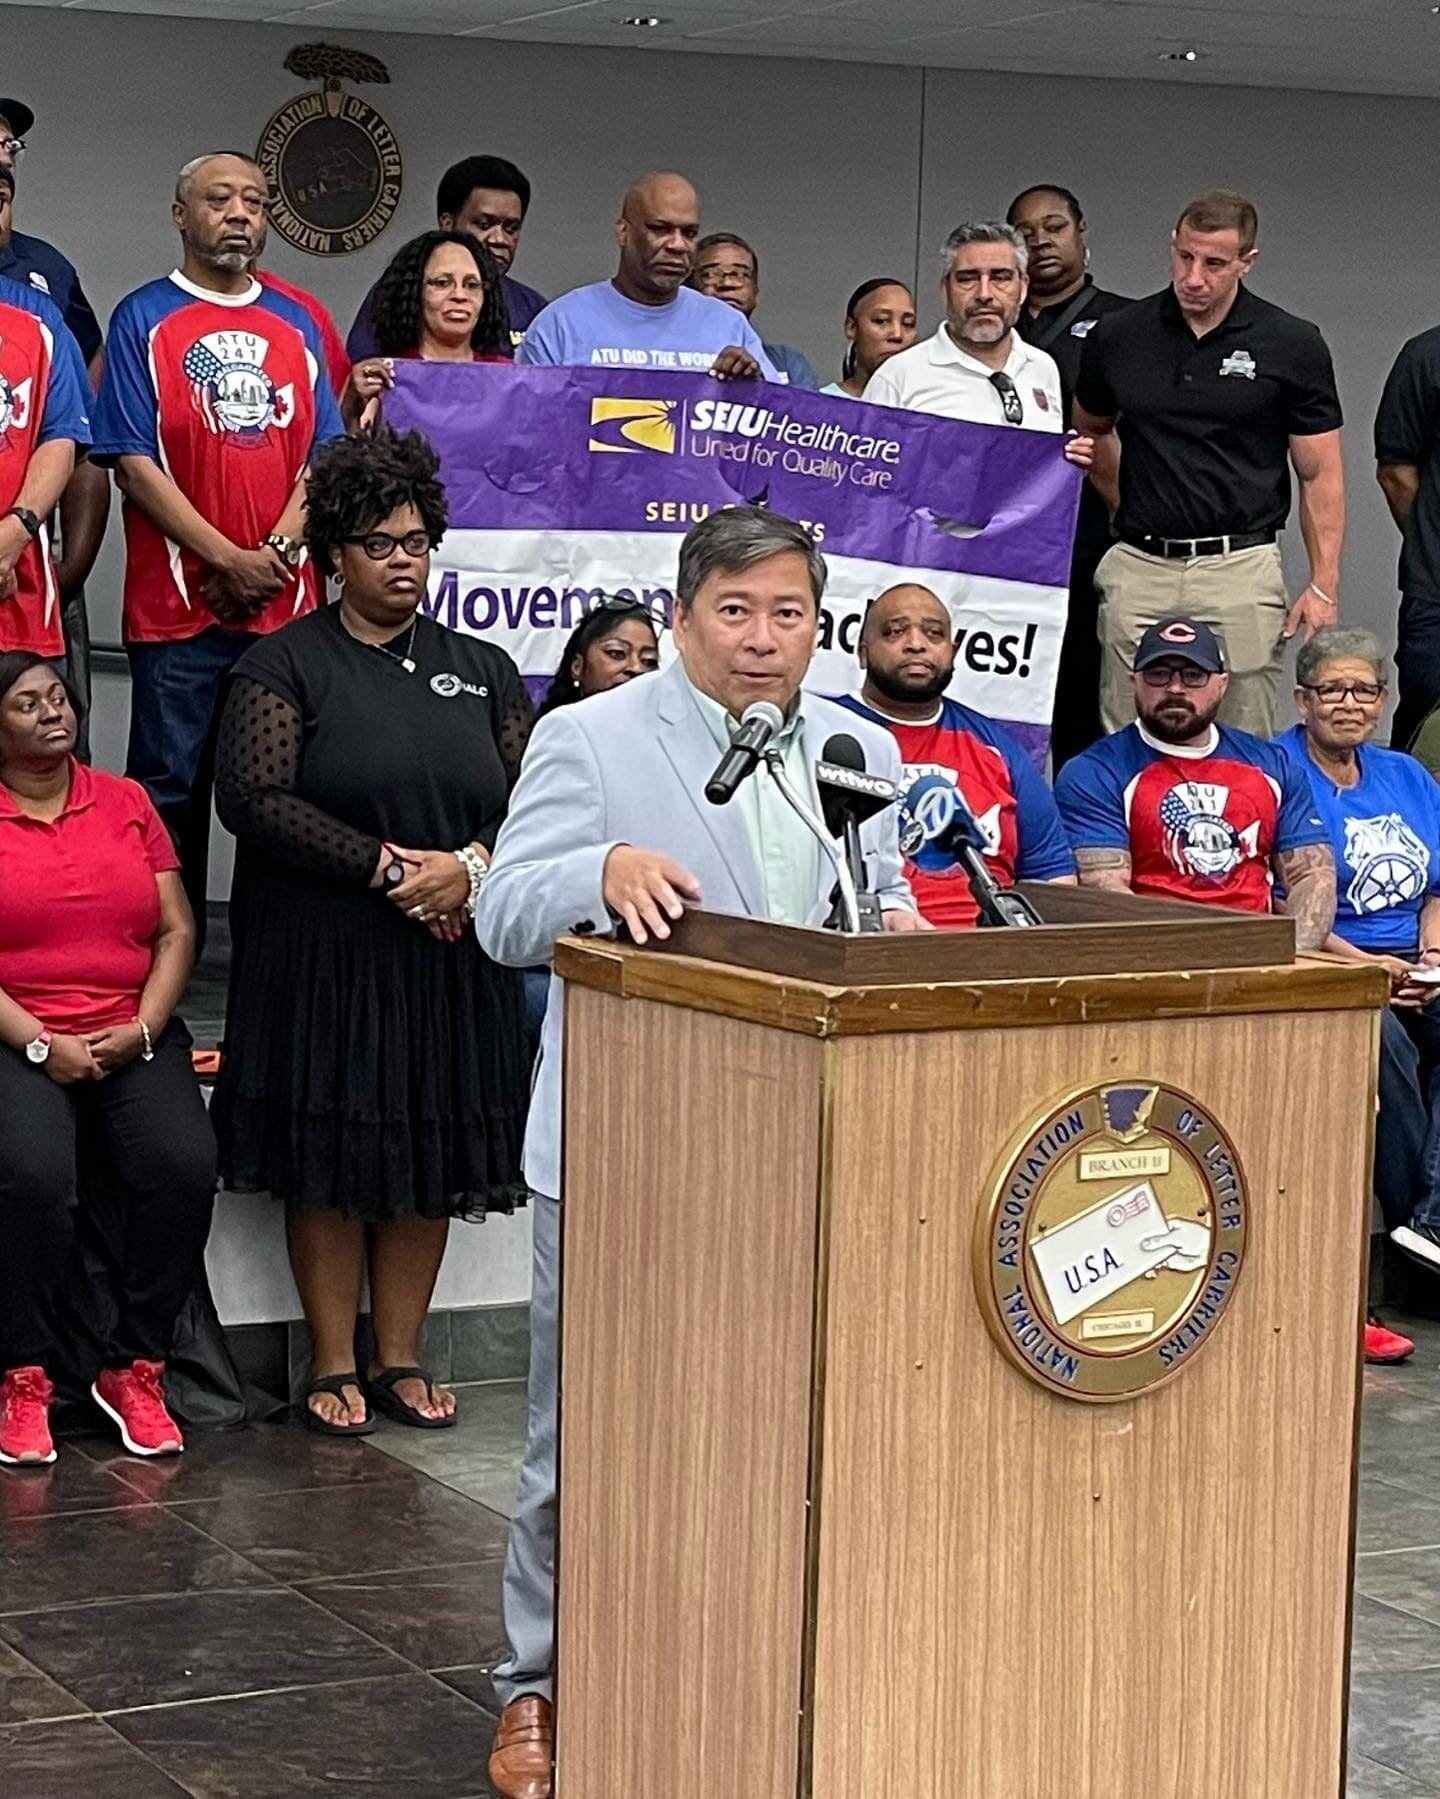 CFL Secretary-Treasurer Don Villar (NABET-CWA) speaking at a press conference on violence in Chicago